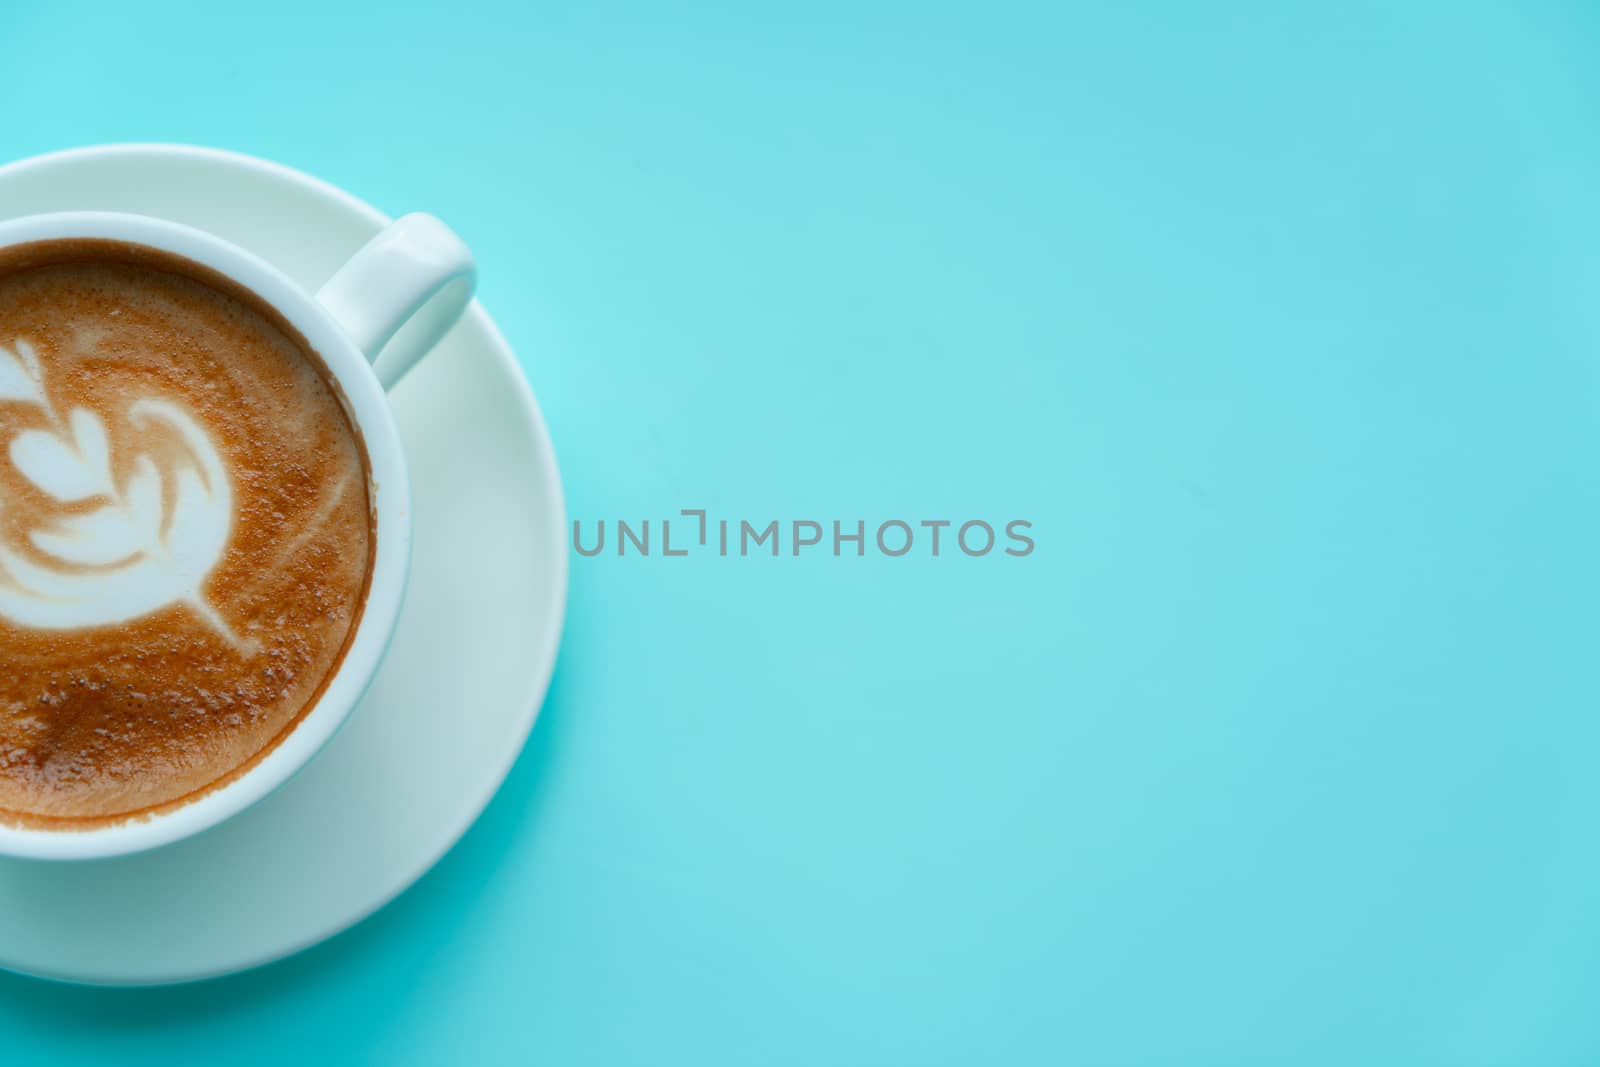 Hot coffee with late art on blue background by Buttus_casso